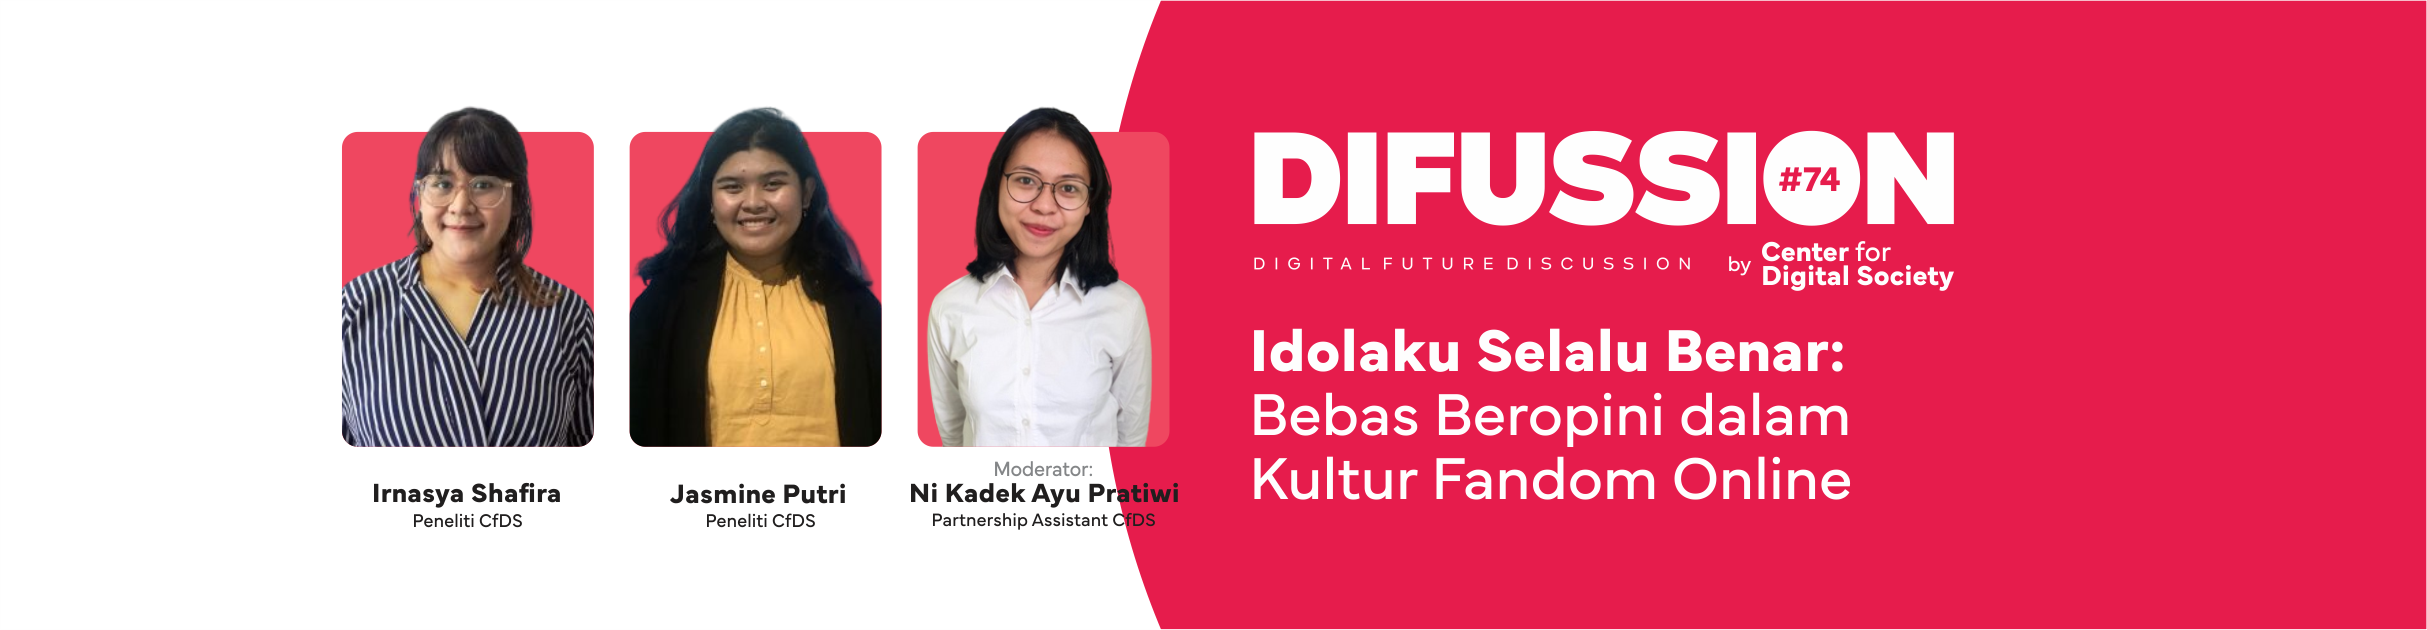 [PRESS RELEASE] My Idol Is Always Right: Free Opinions in Online Fandom Culture | Diffusion #74